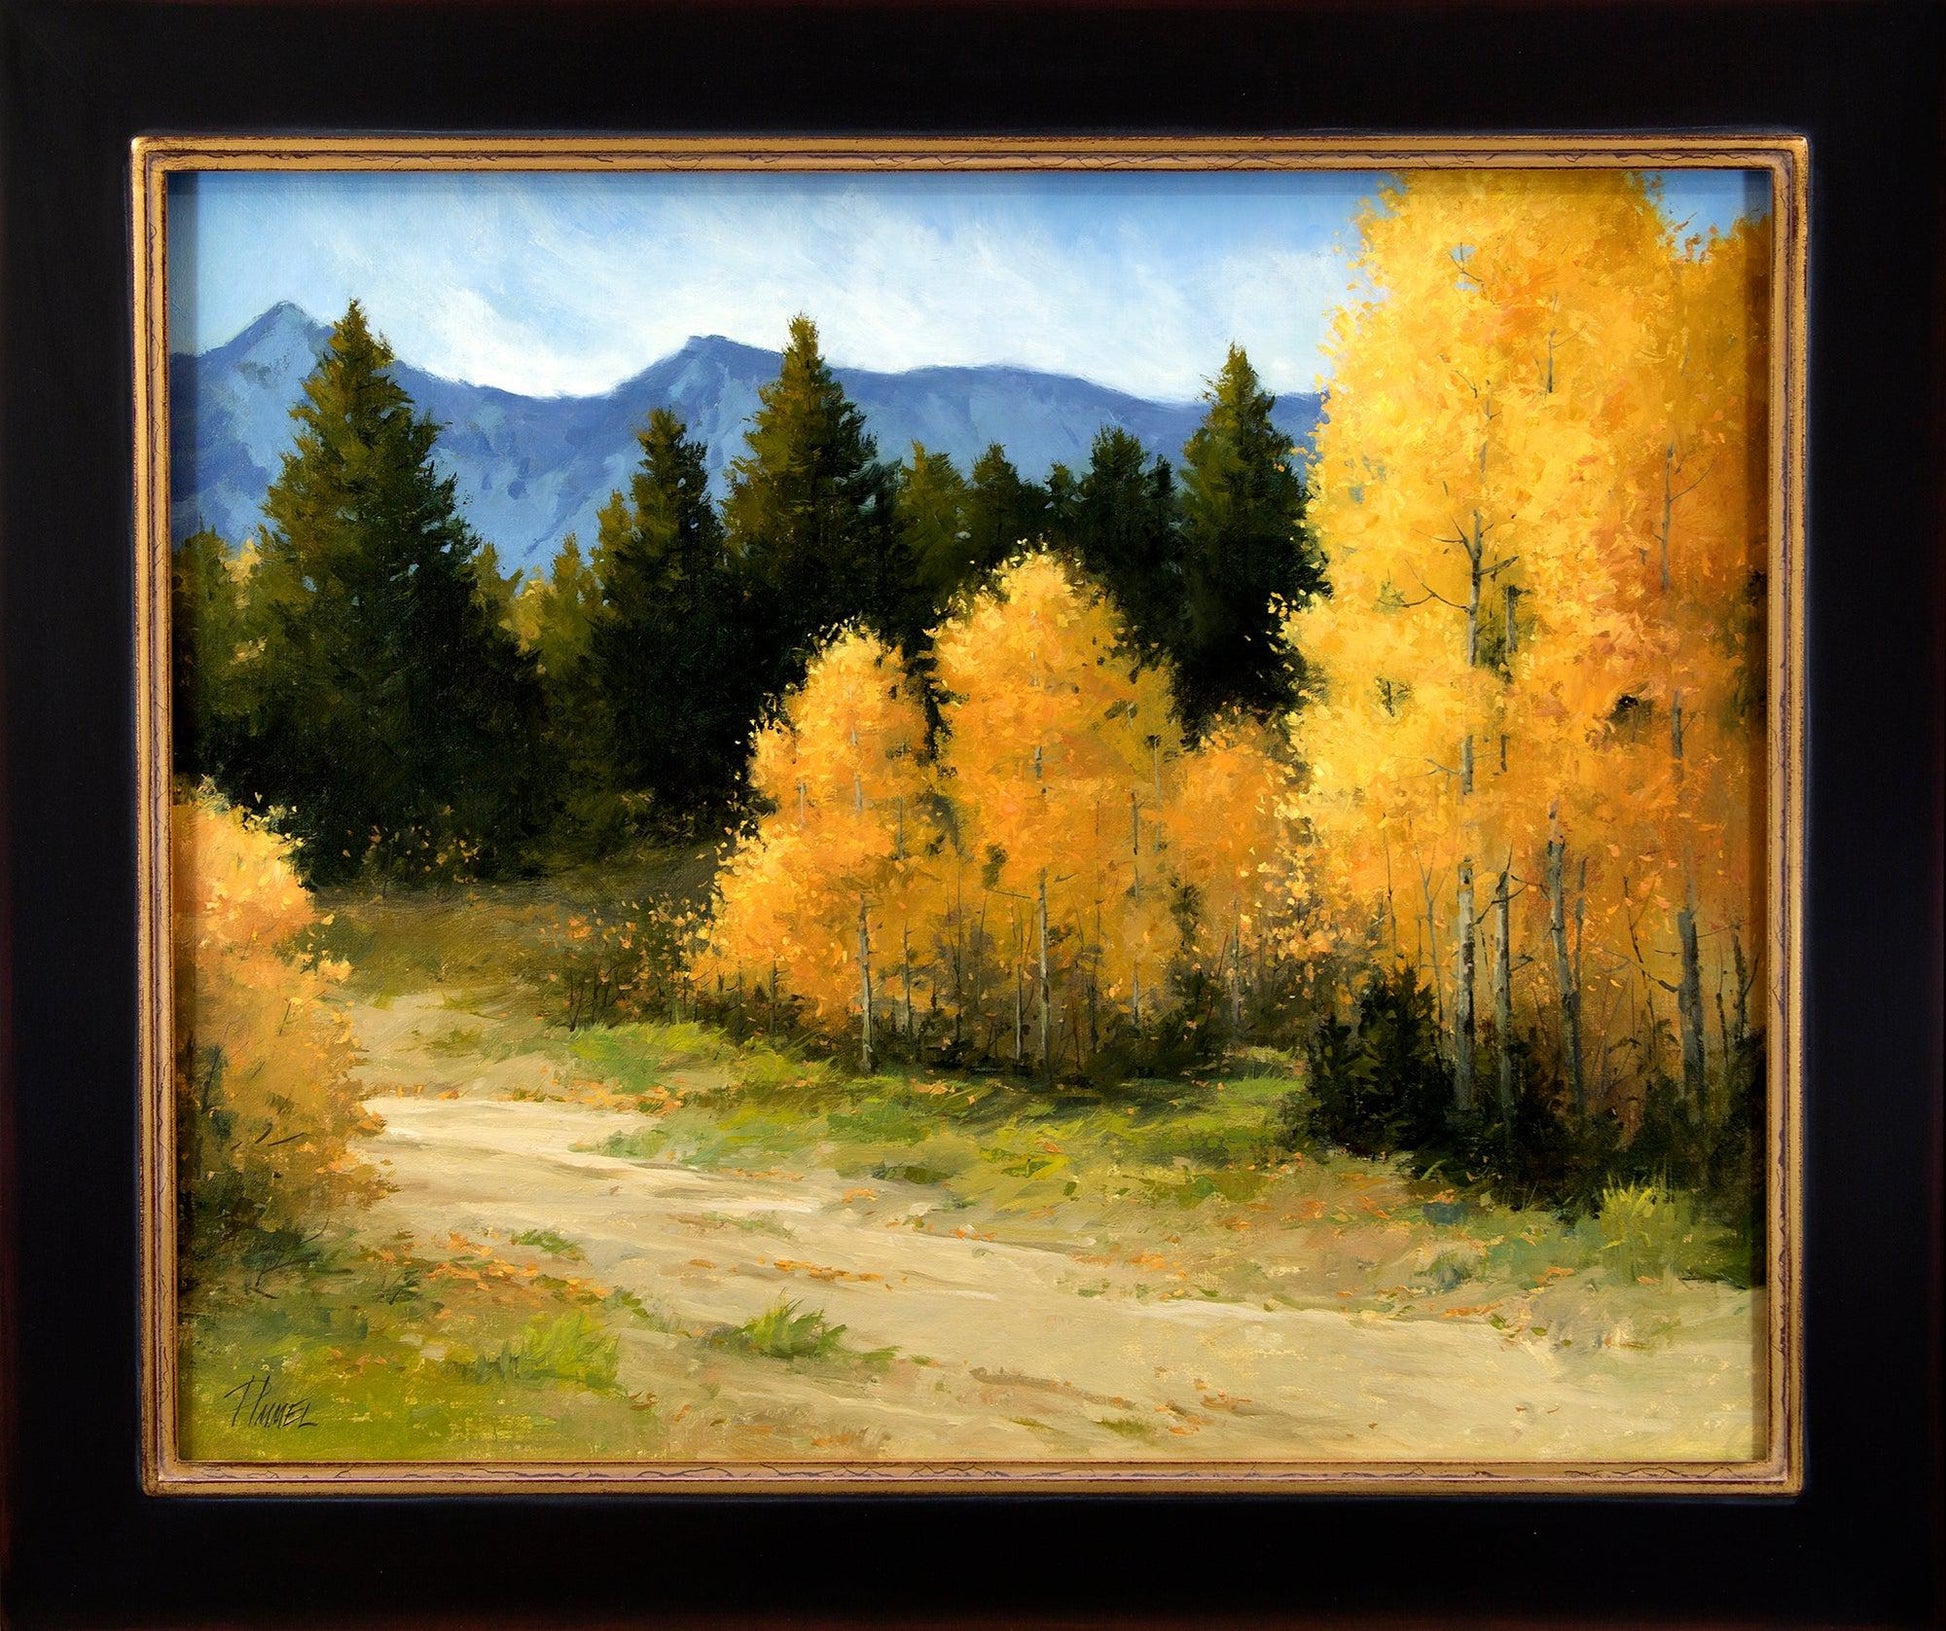 Rocky Mountain Gold-Painting-Peggy Immel-Sorrel Sky Gallery